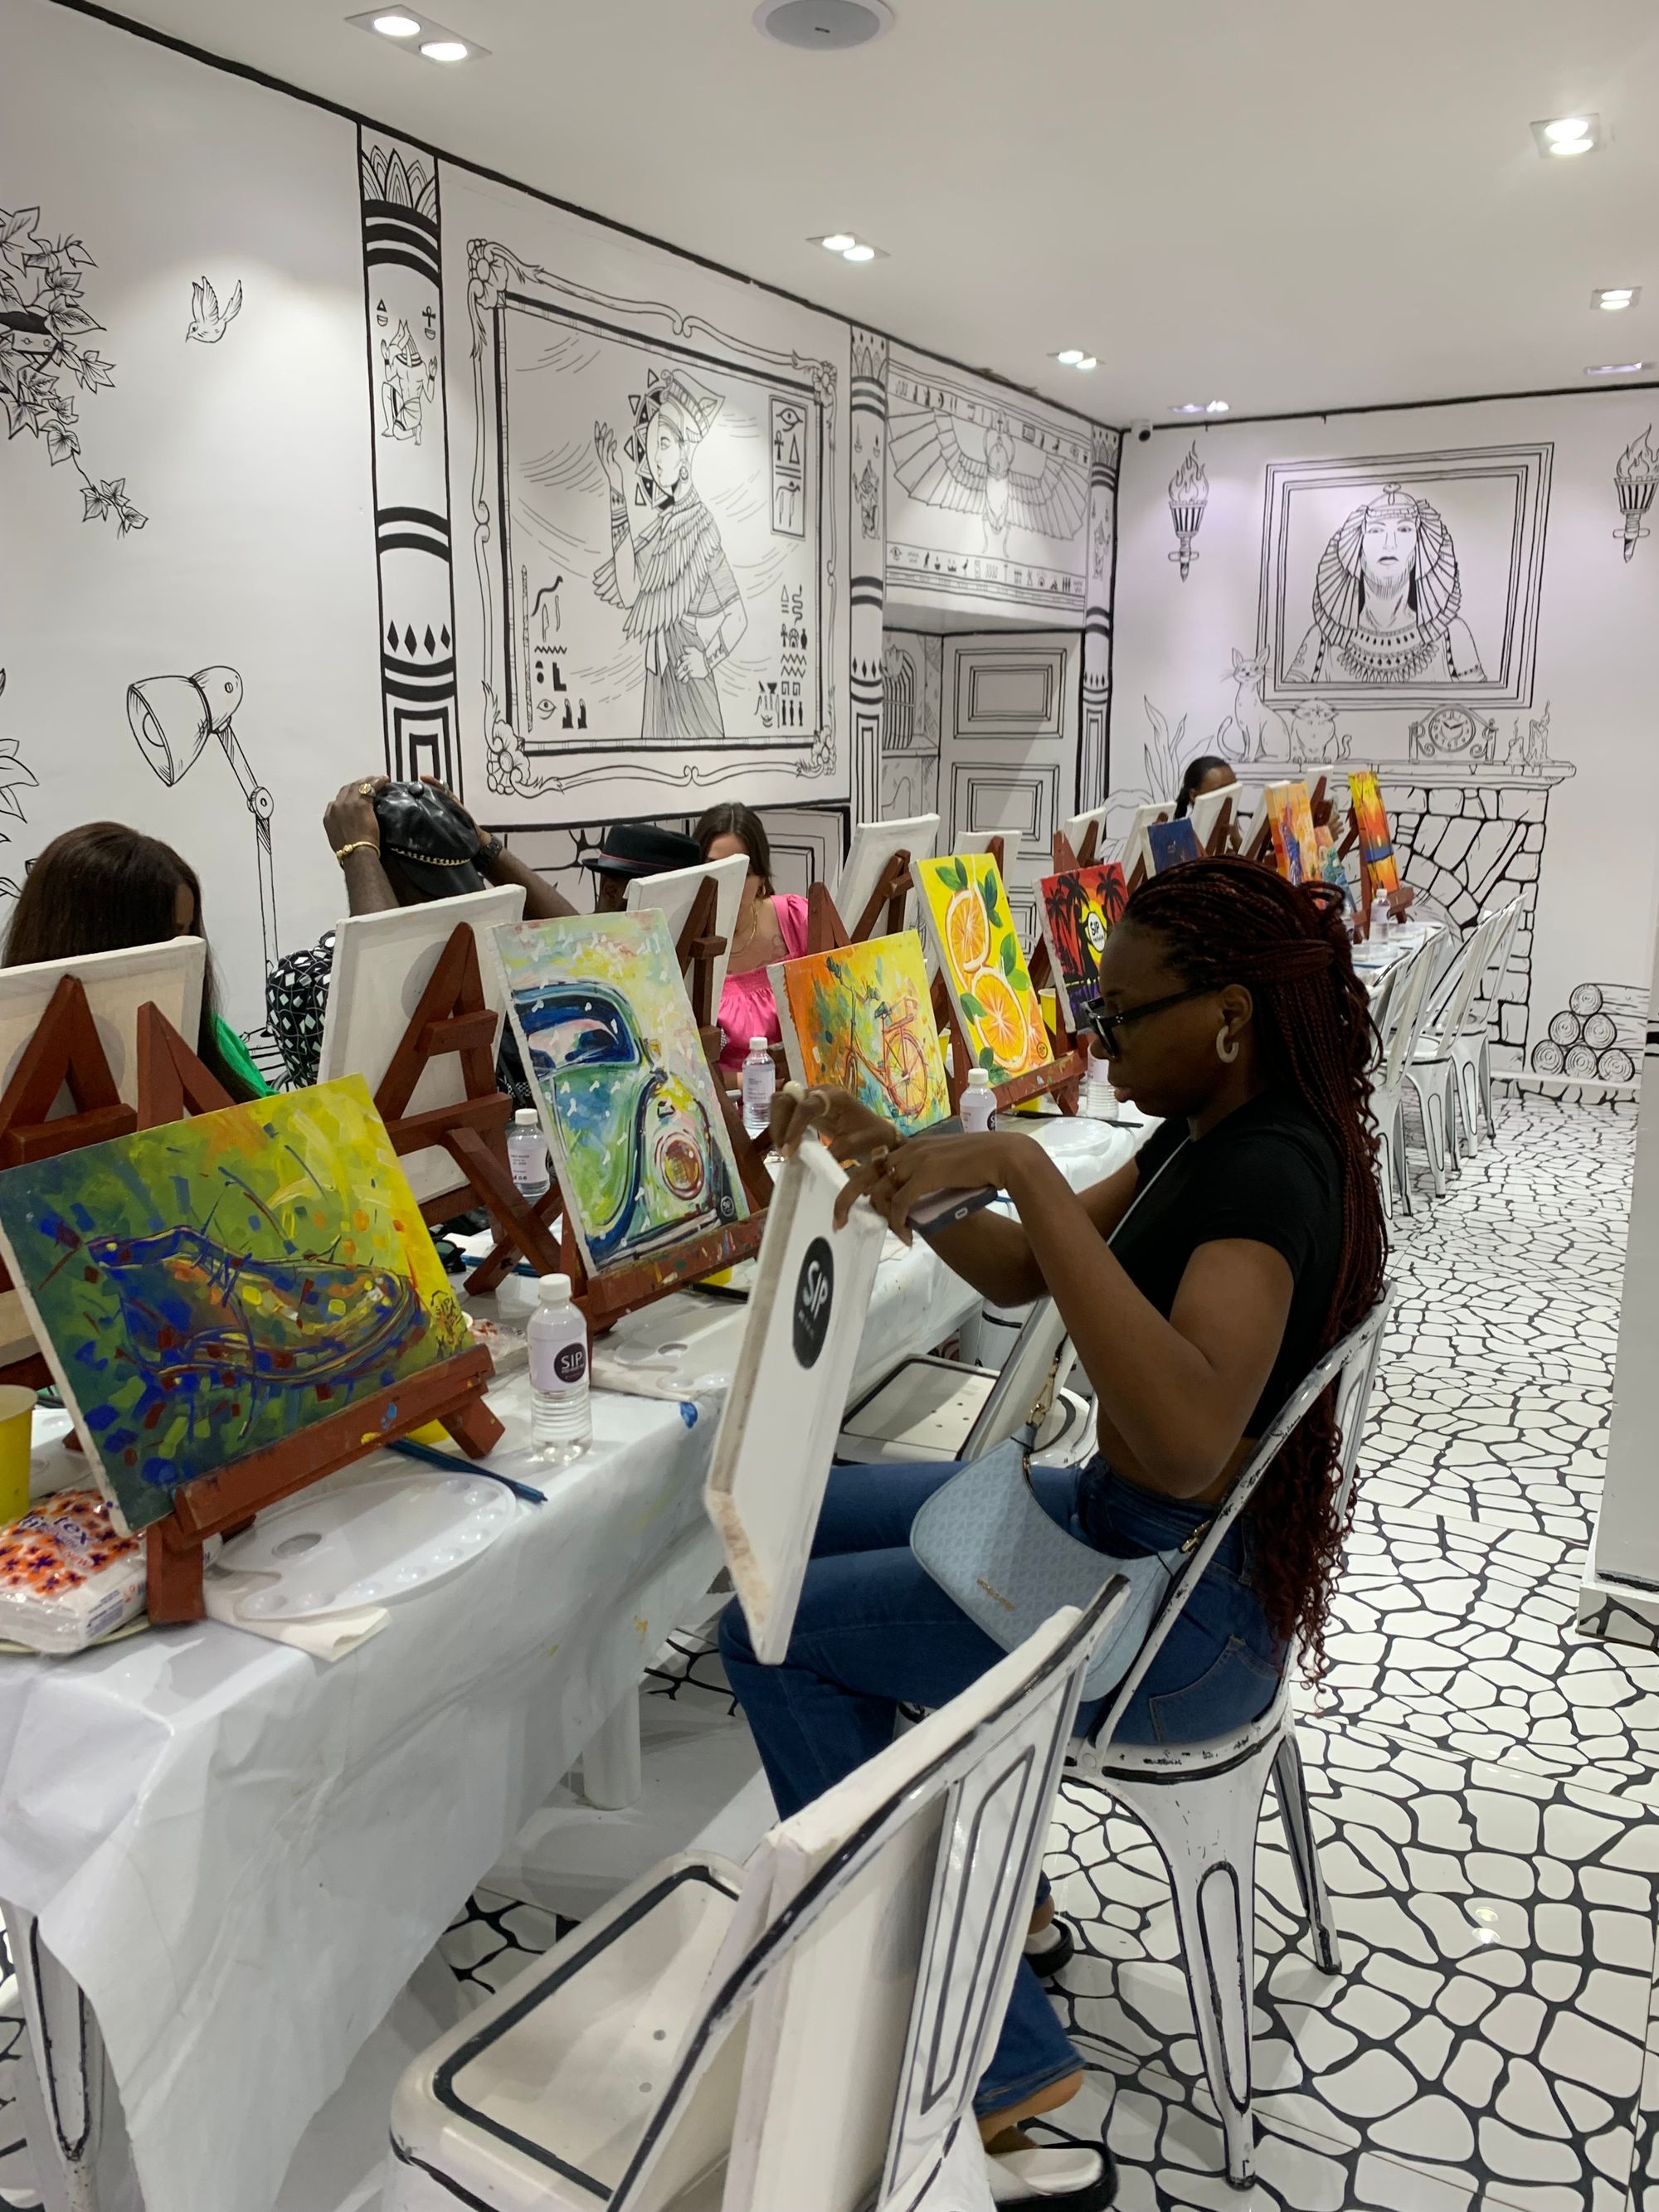 The setup for a sip and paint session with Sip and Paint NG